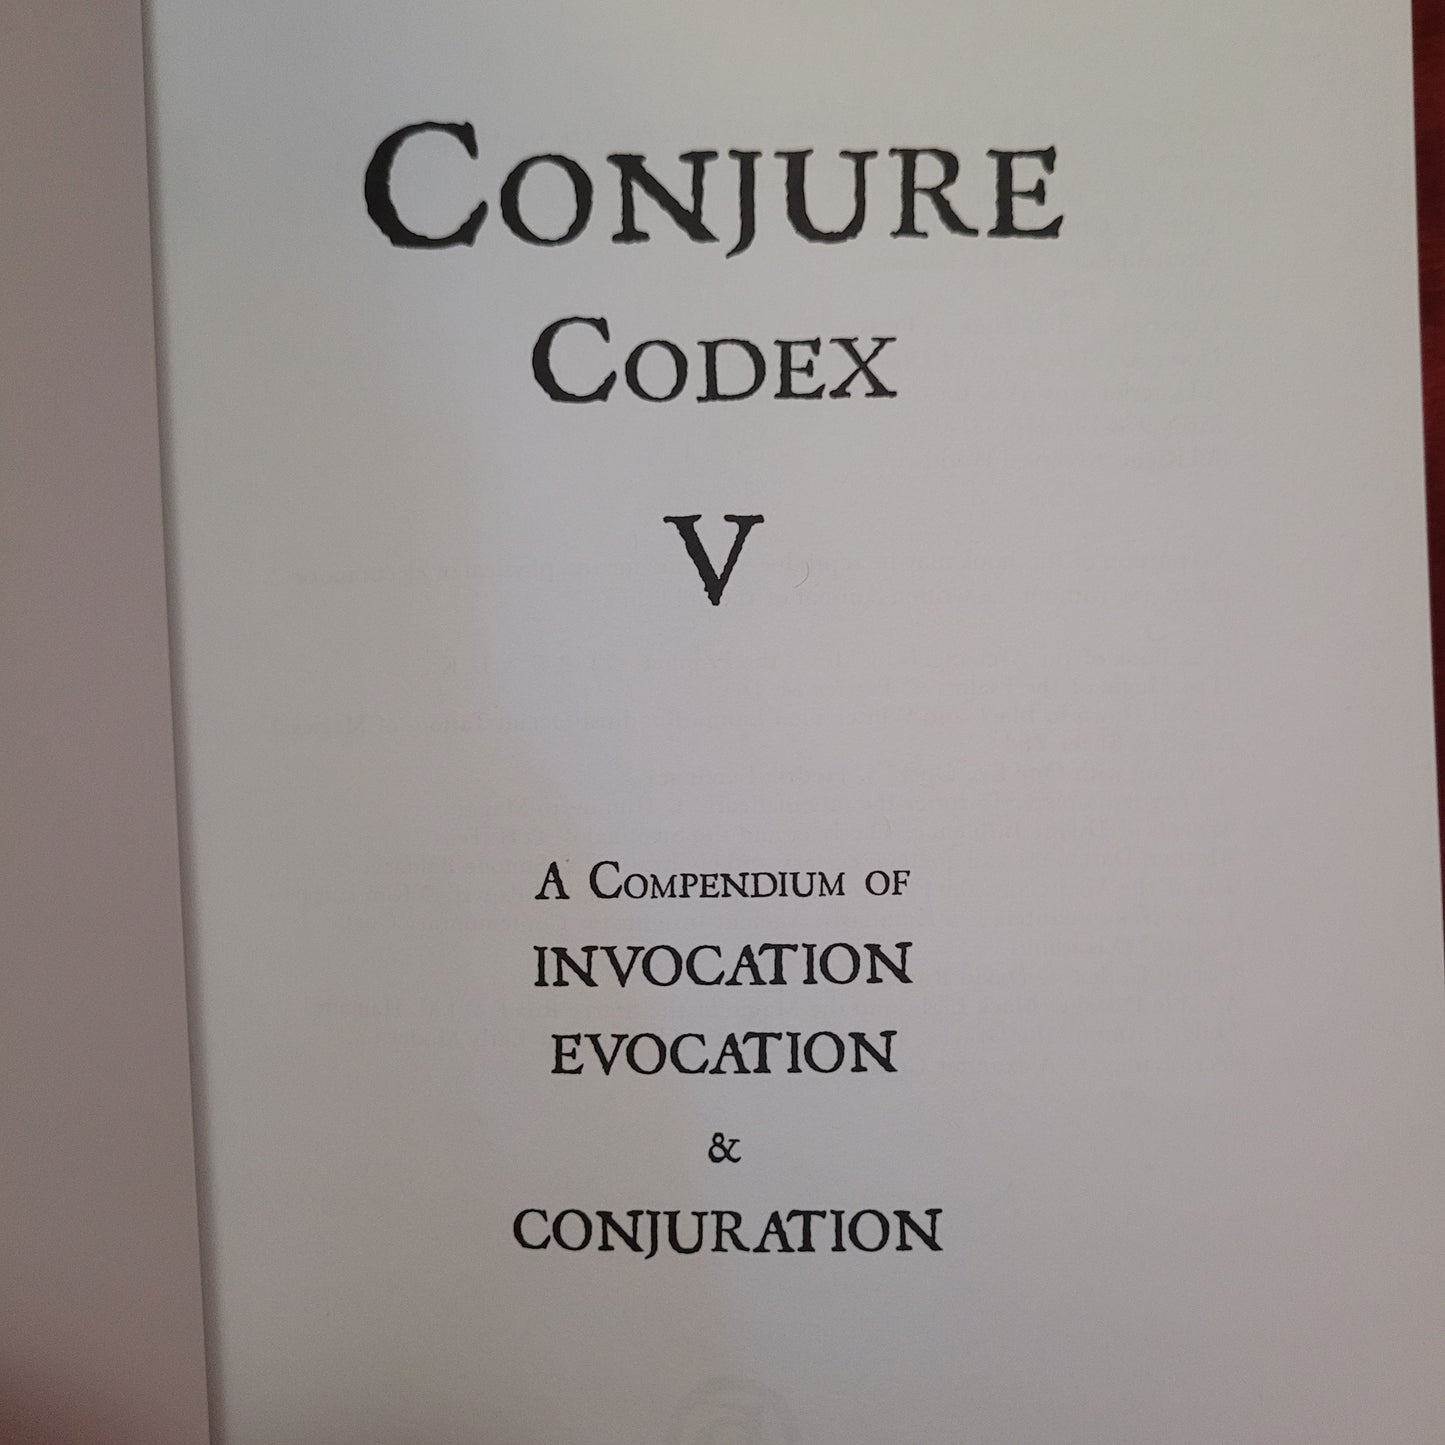 Conjure Codex 5: A Compendium of Invocation, Evocation and Conjuration edited by Jake Stratton-Kent, Dis Albion, and Erzebet  Barthold (Hadean Press, 2022)